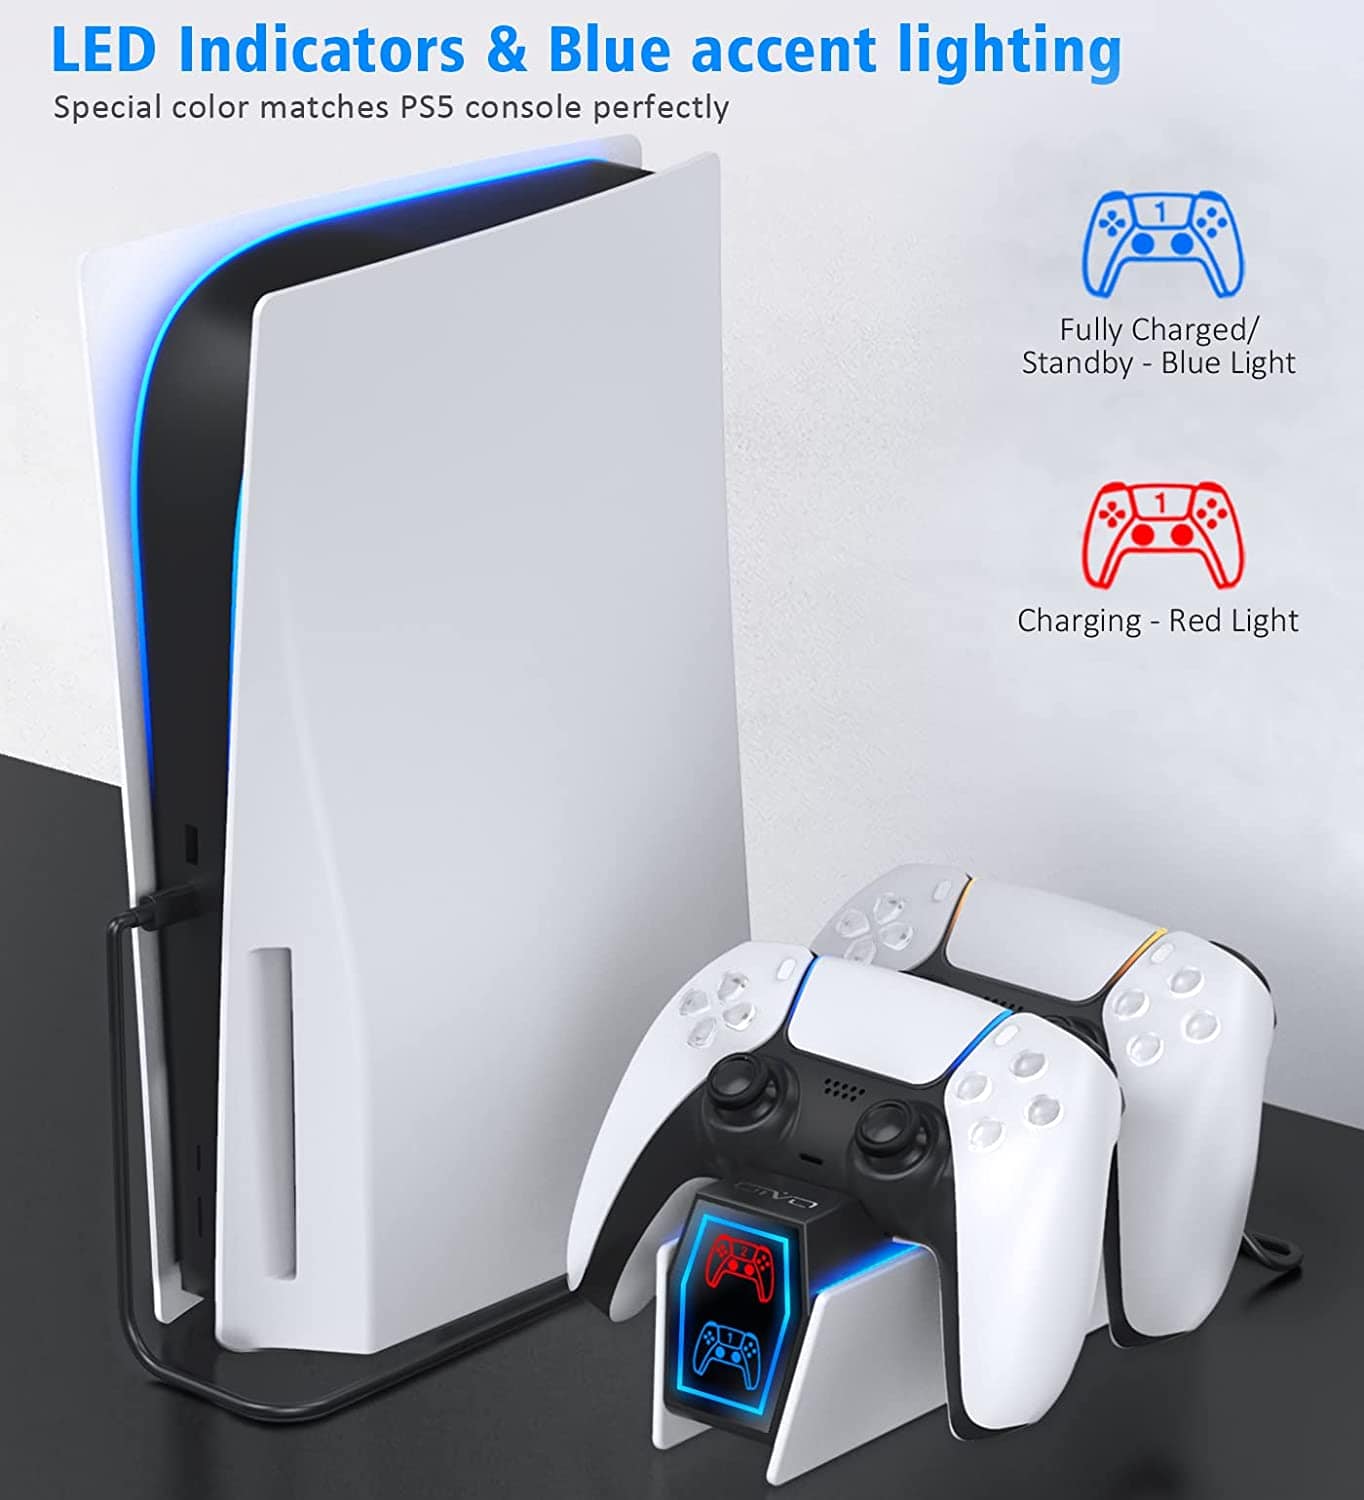 PS5 Charging Station with 2 Fast Charging Cords - DualSense Controller Charger & Docking Station - Smart Tech Shopping